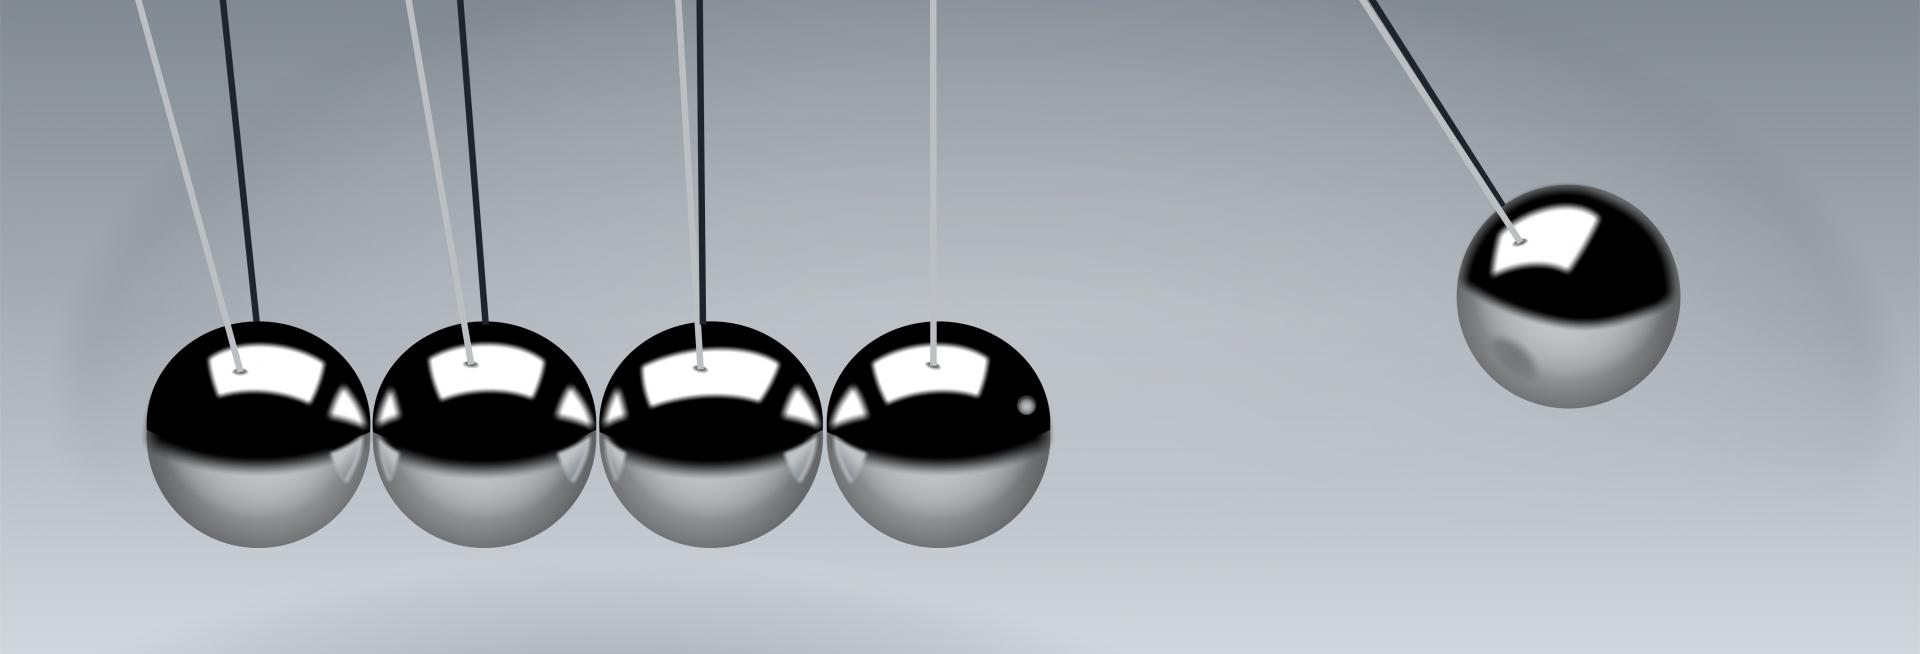 a close-up of a newton's cradle with one ball raised